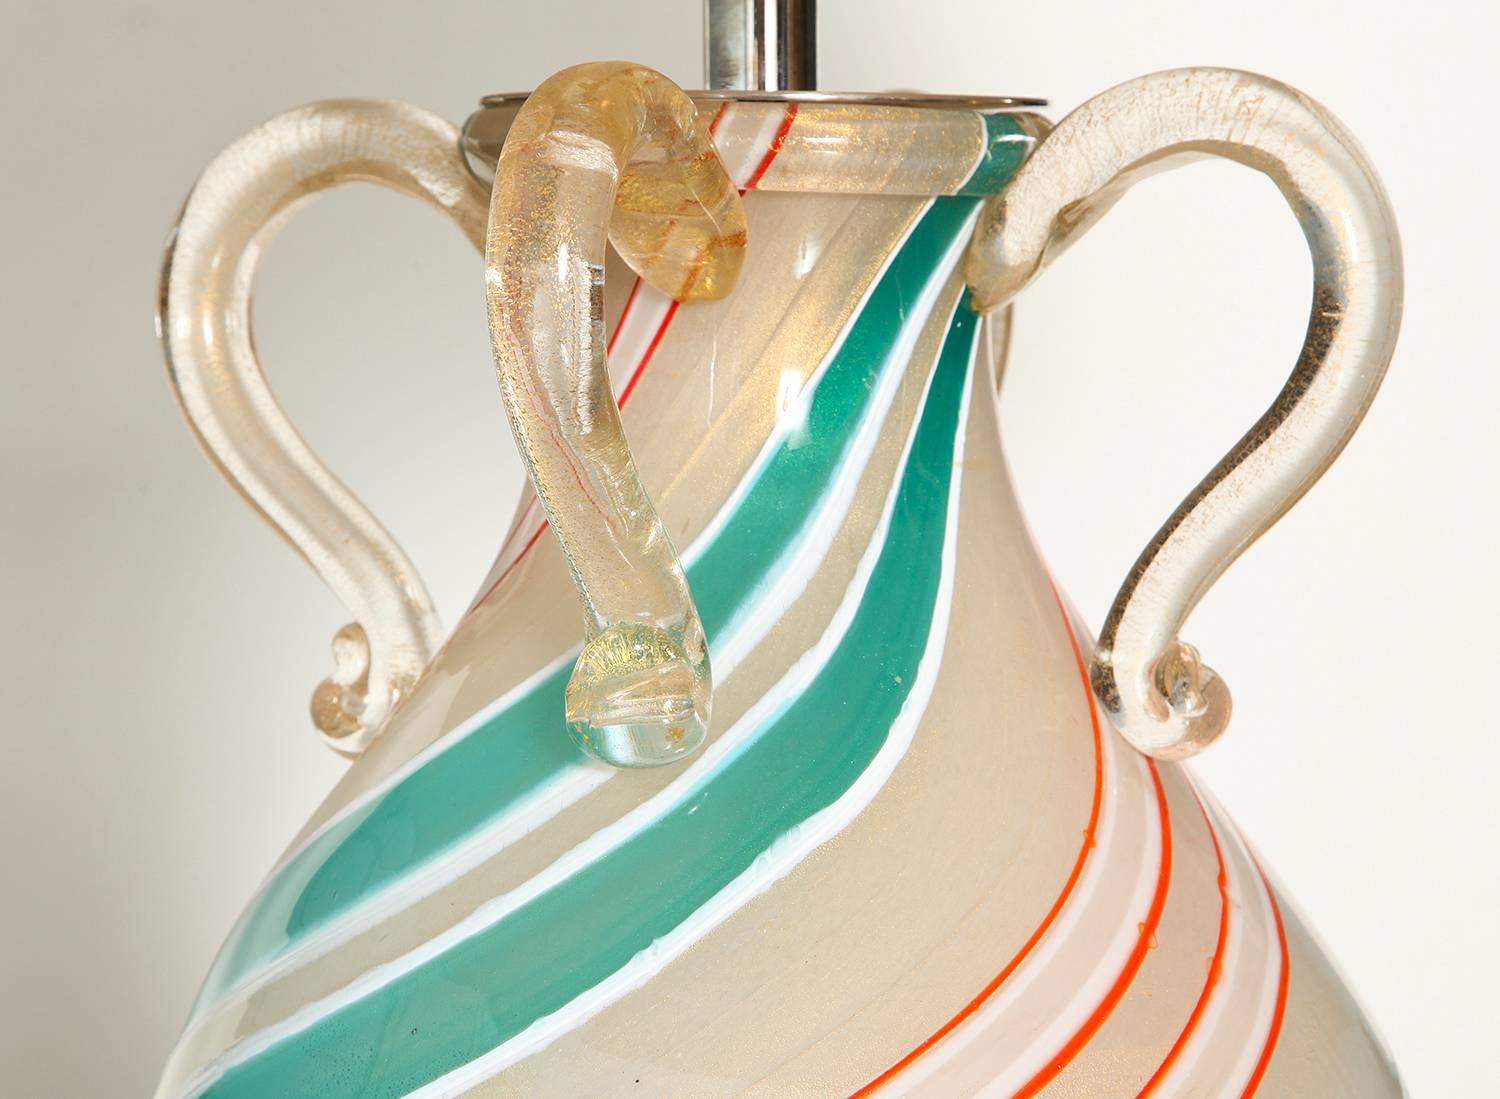 Bulbous form with interior gold inclusions and diagonal stripes of white, aqua and red. Applied hands and trim at top and bottom. White lacquered wood pedestal base.